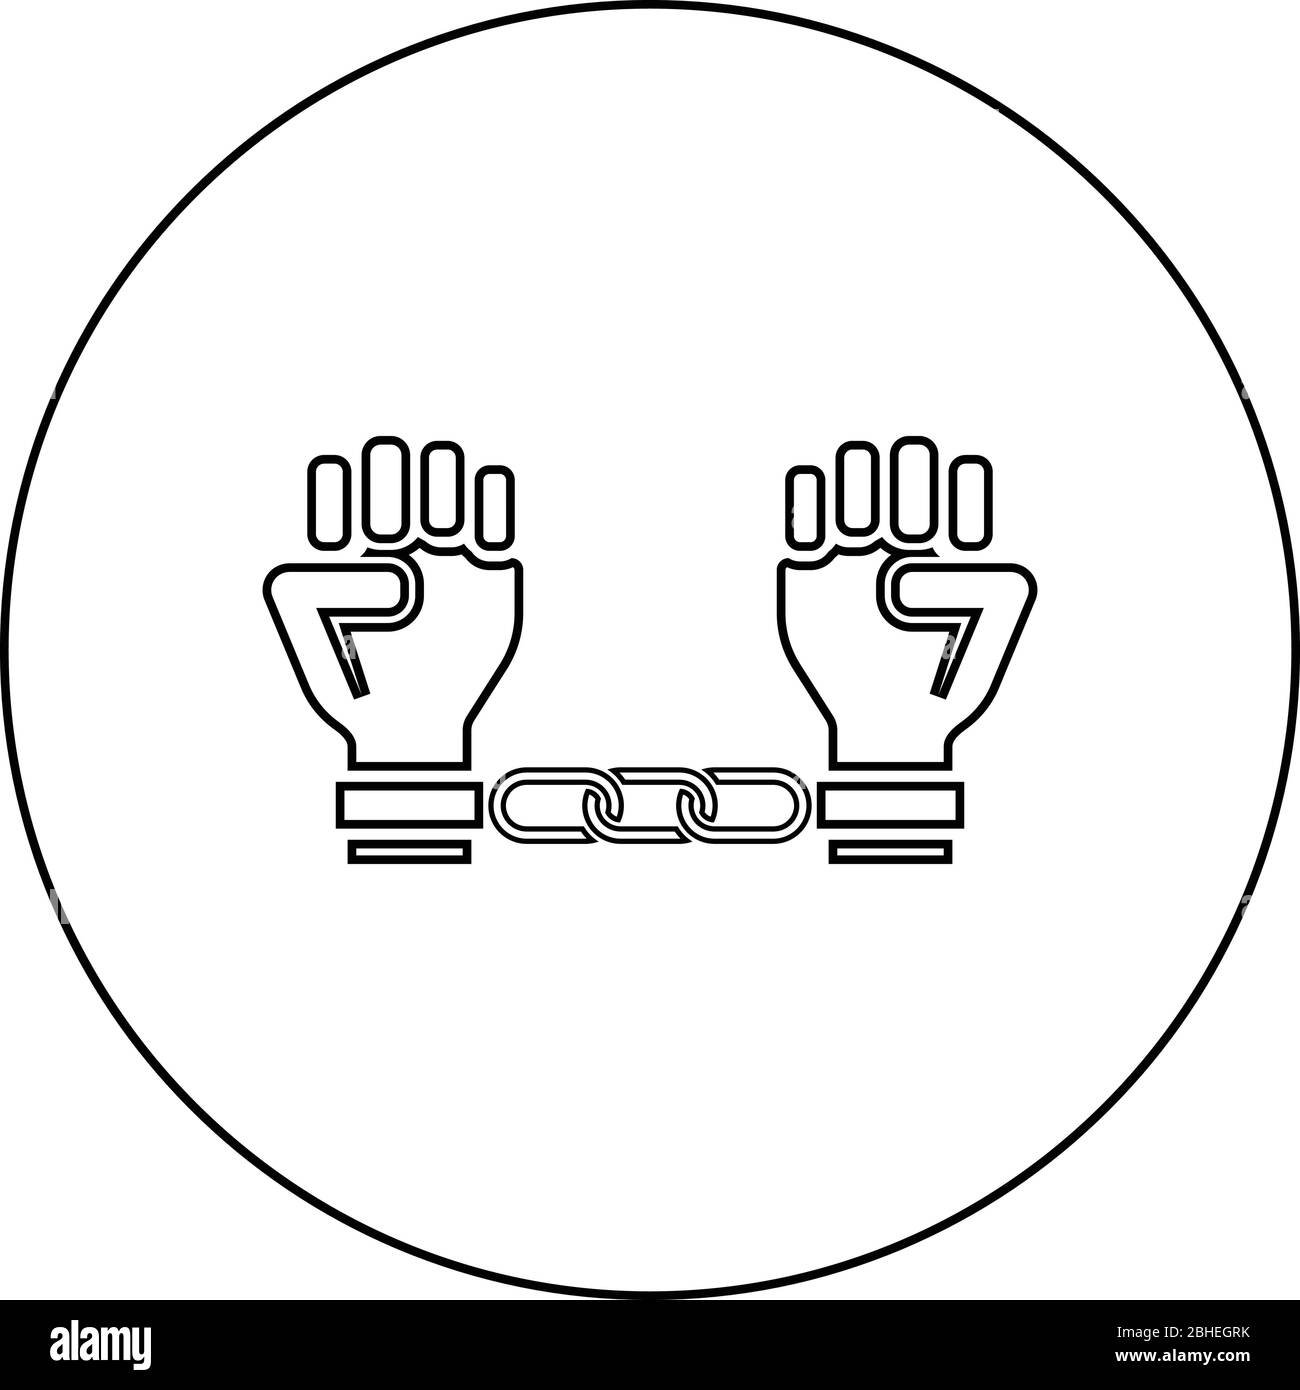 Handcuffed hands Chained human arms Prisoner concept Manacles on man Detention idea Fetters confine Shackles on person icon in circle round outline Stock Vector